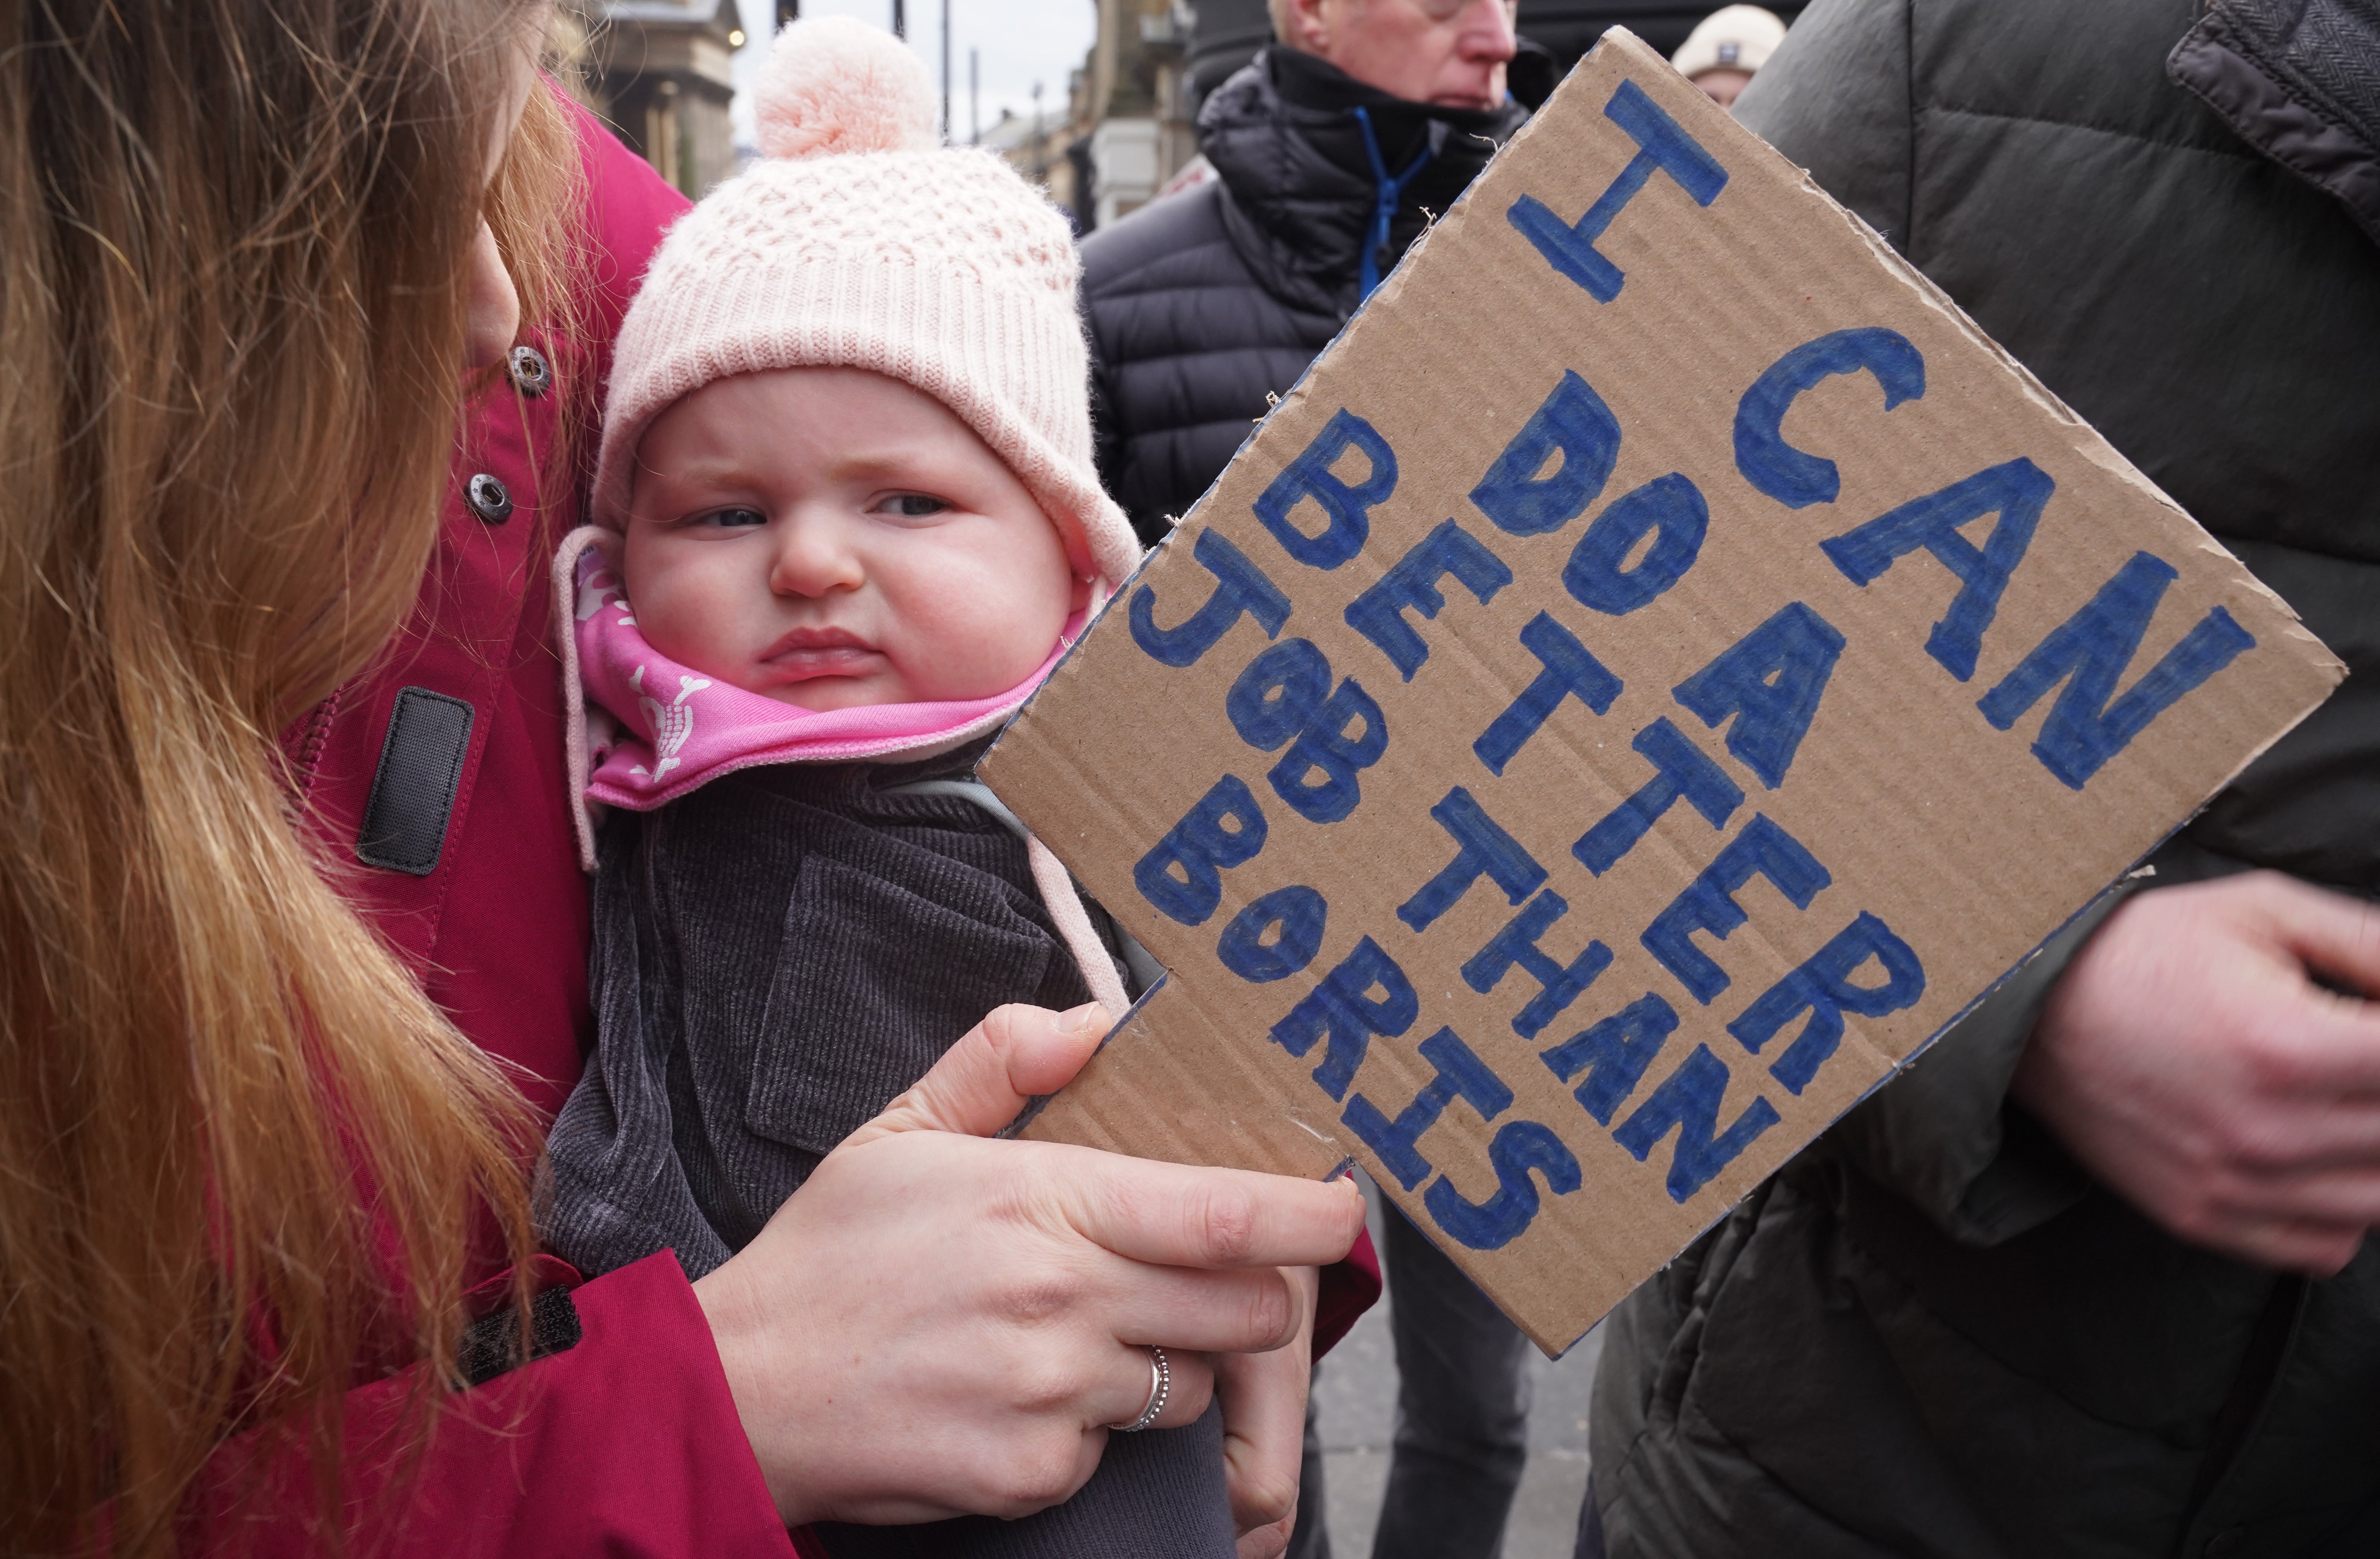 Three-month-old Jocelyn Wilczek joins people in Newcastle taking part in the People’s Assembly nationwide protest about cost of living crisis (Owen Humphreys/PA)